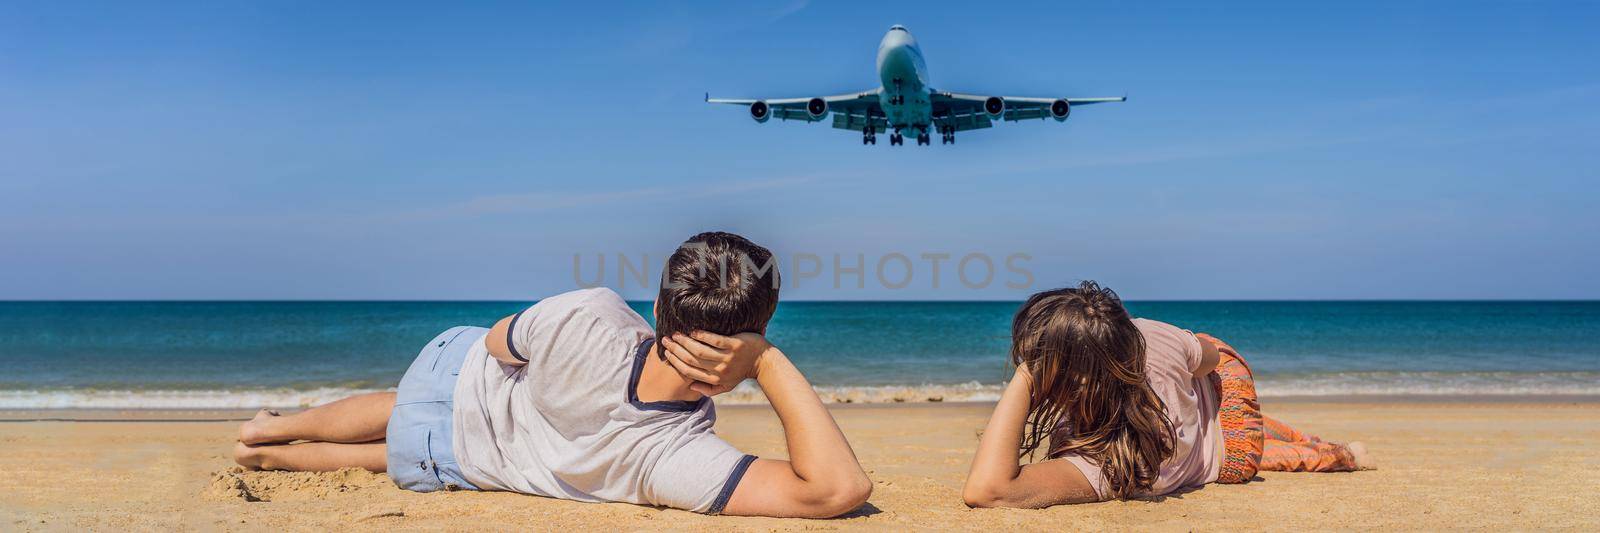 Man and woman tourists have fun on the beach watching the landing planes. Traveling on an airplane concept. Text space. Island Phuket in Thailand. Impressive paradise. Hot beach Mai Khao. Amazing landscape. BANNER, LONG FORMAT